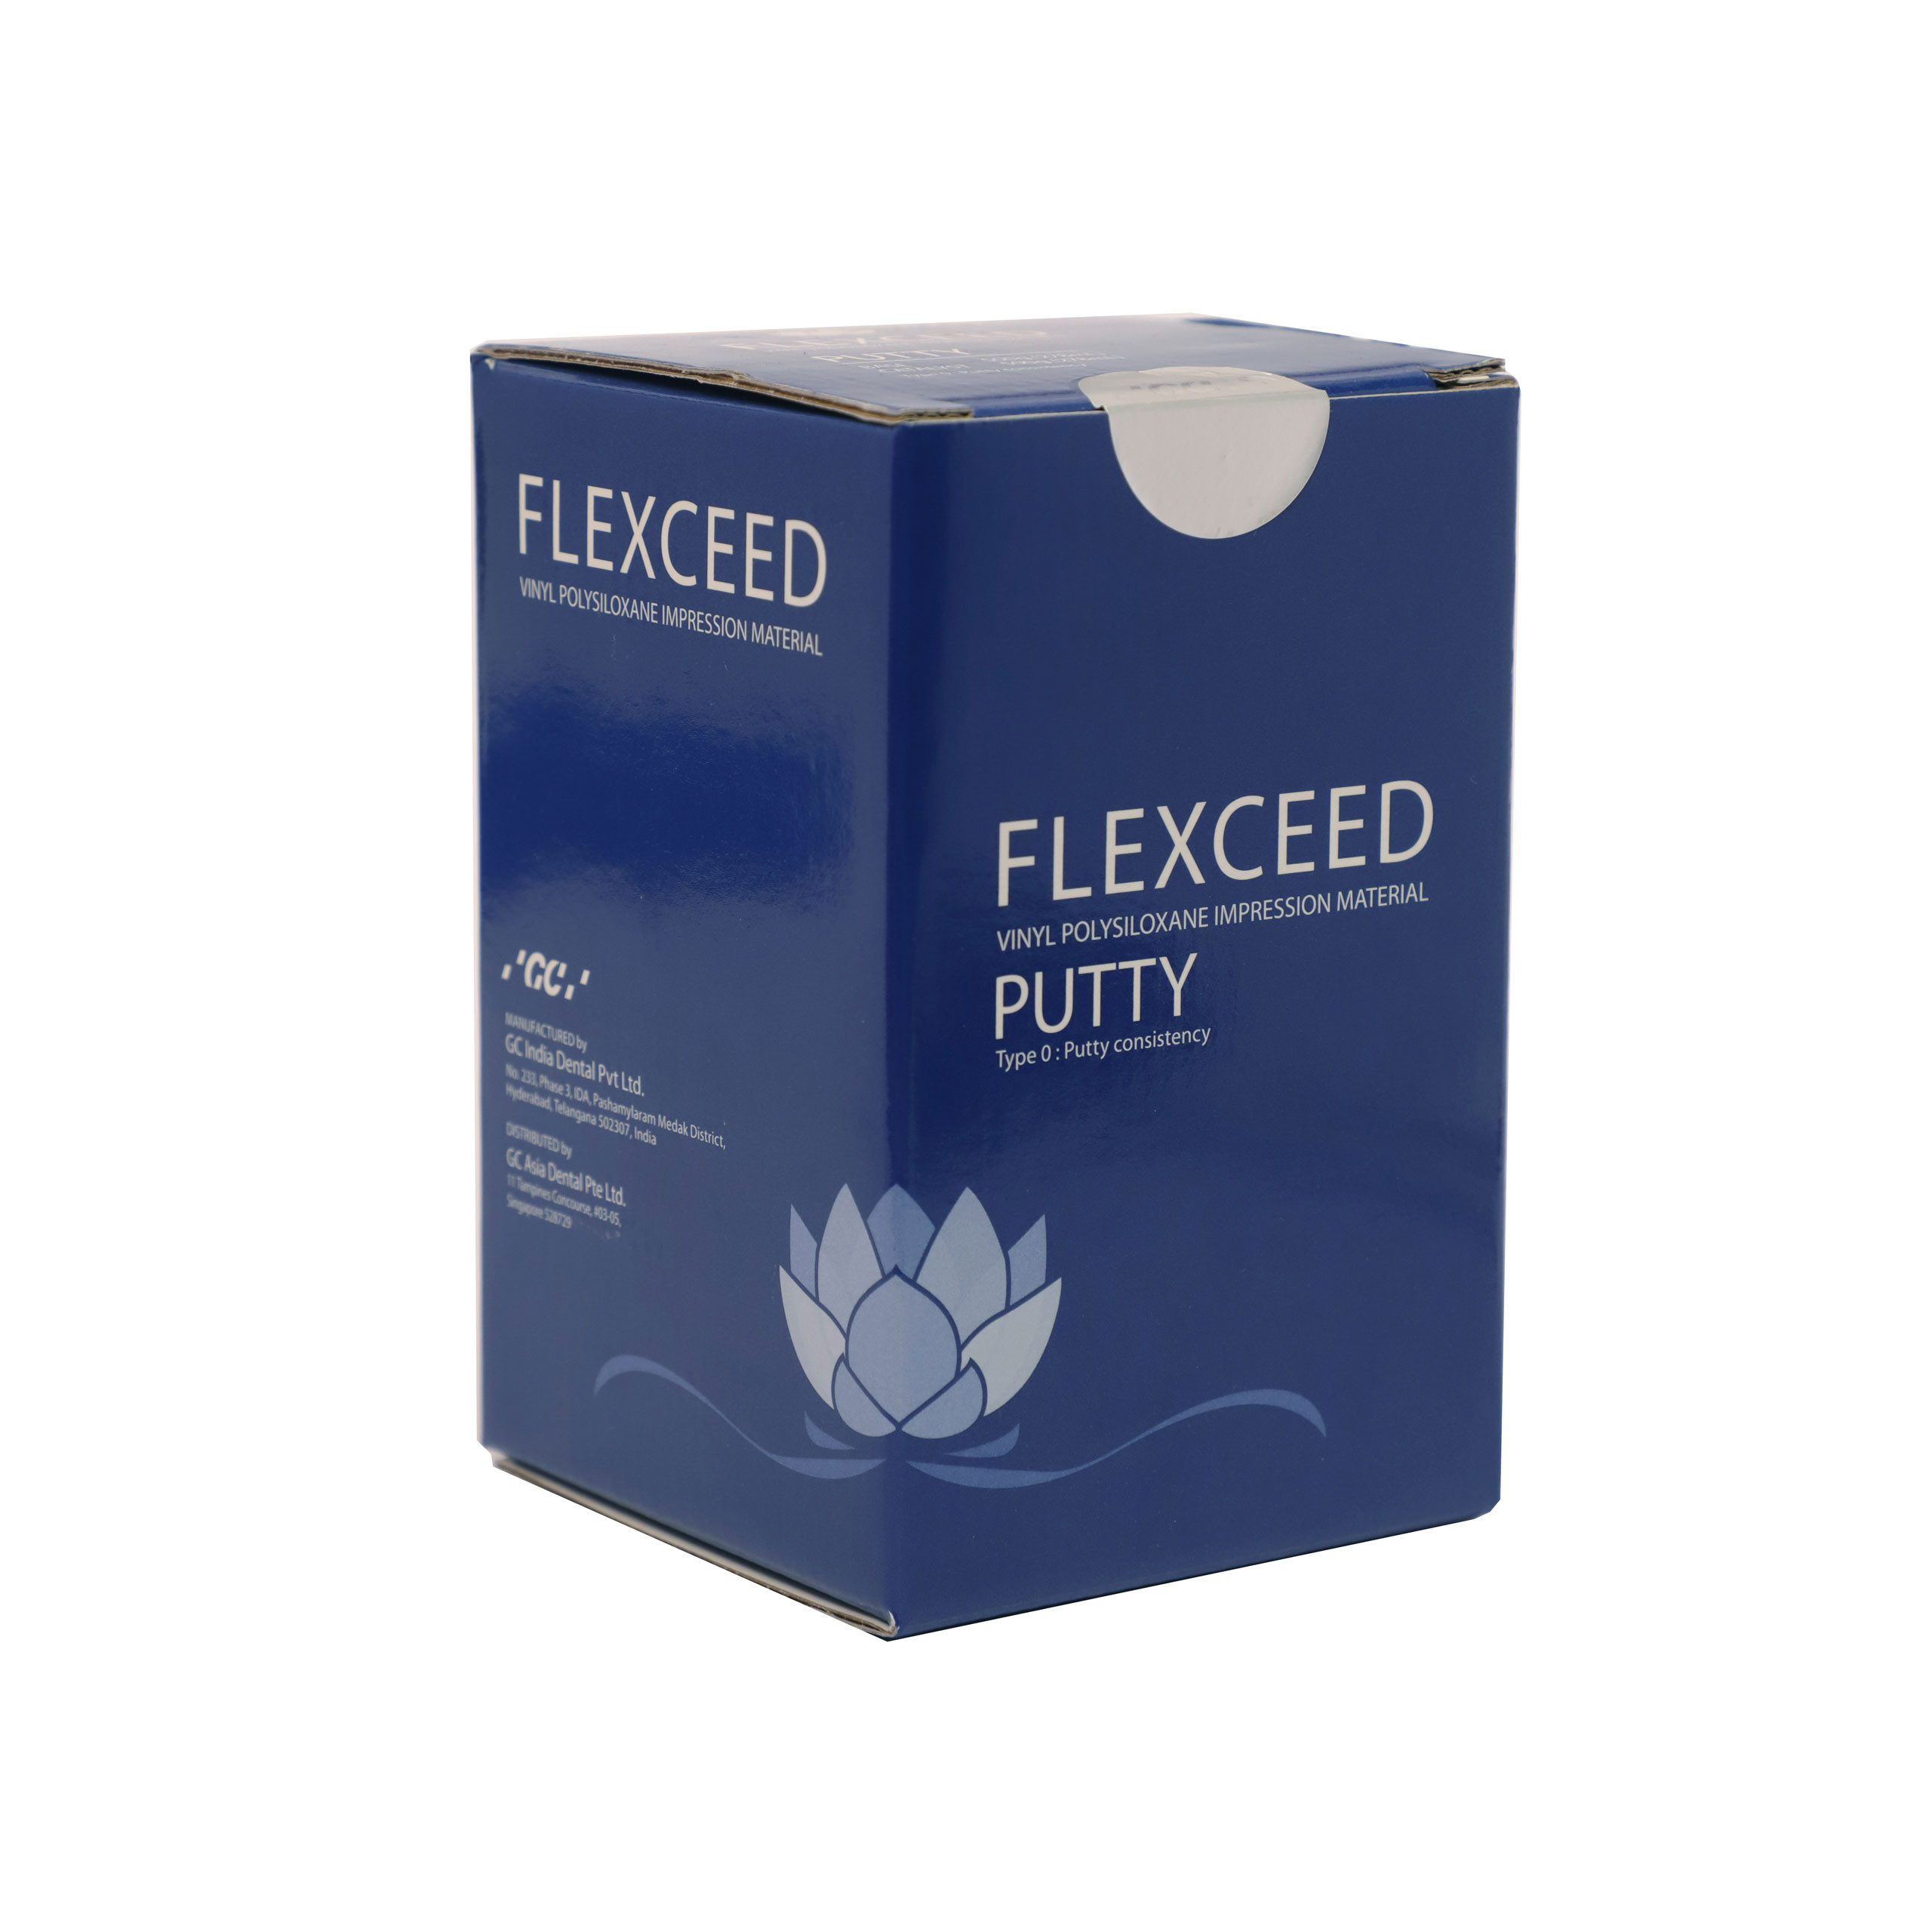 GC Flexceed Putty (Vinyl Polysiloxane Impression Material ; Type 0: Putty Consistency)